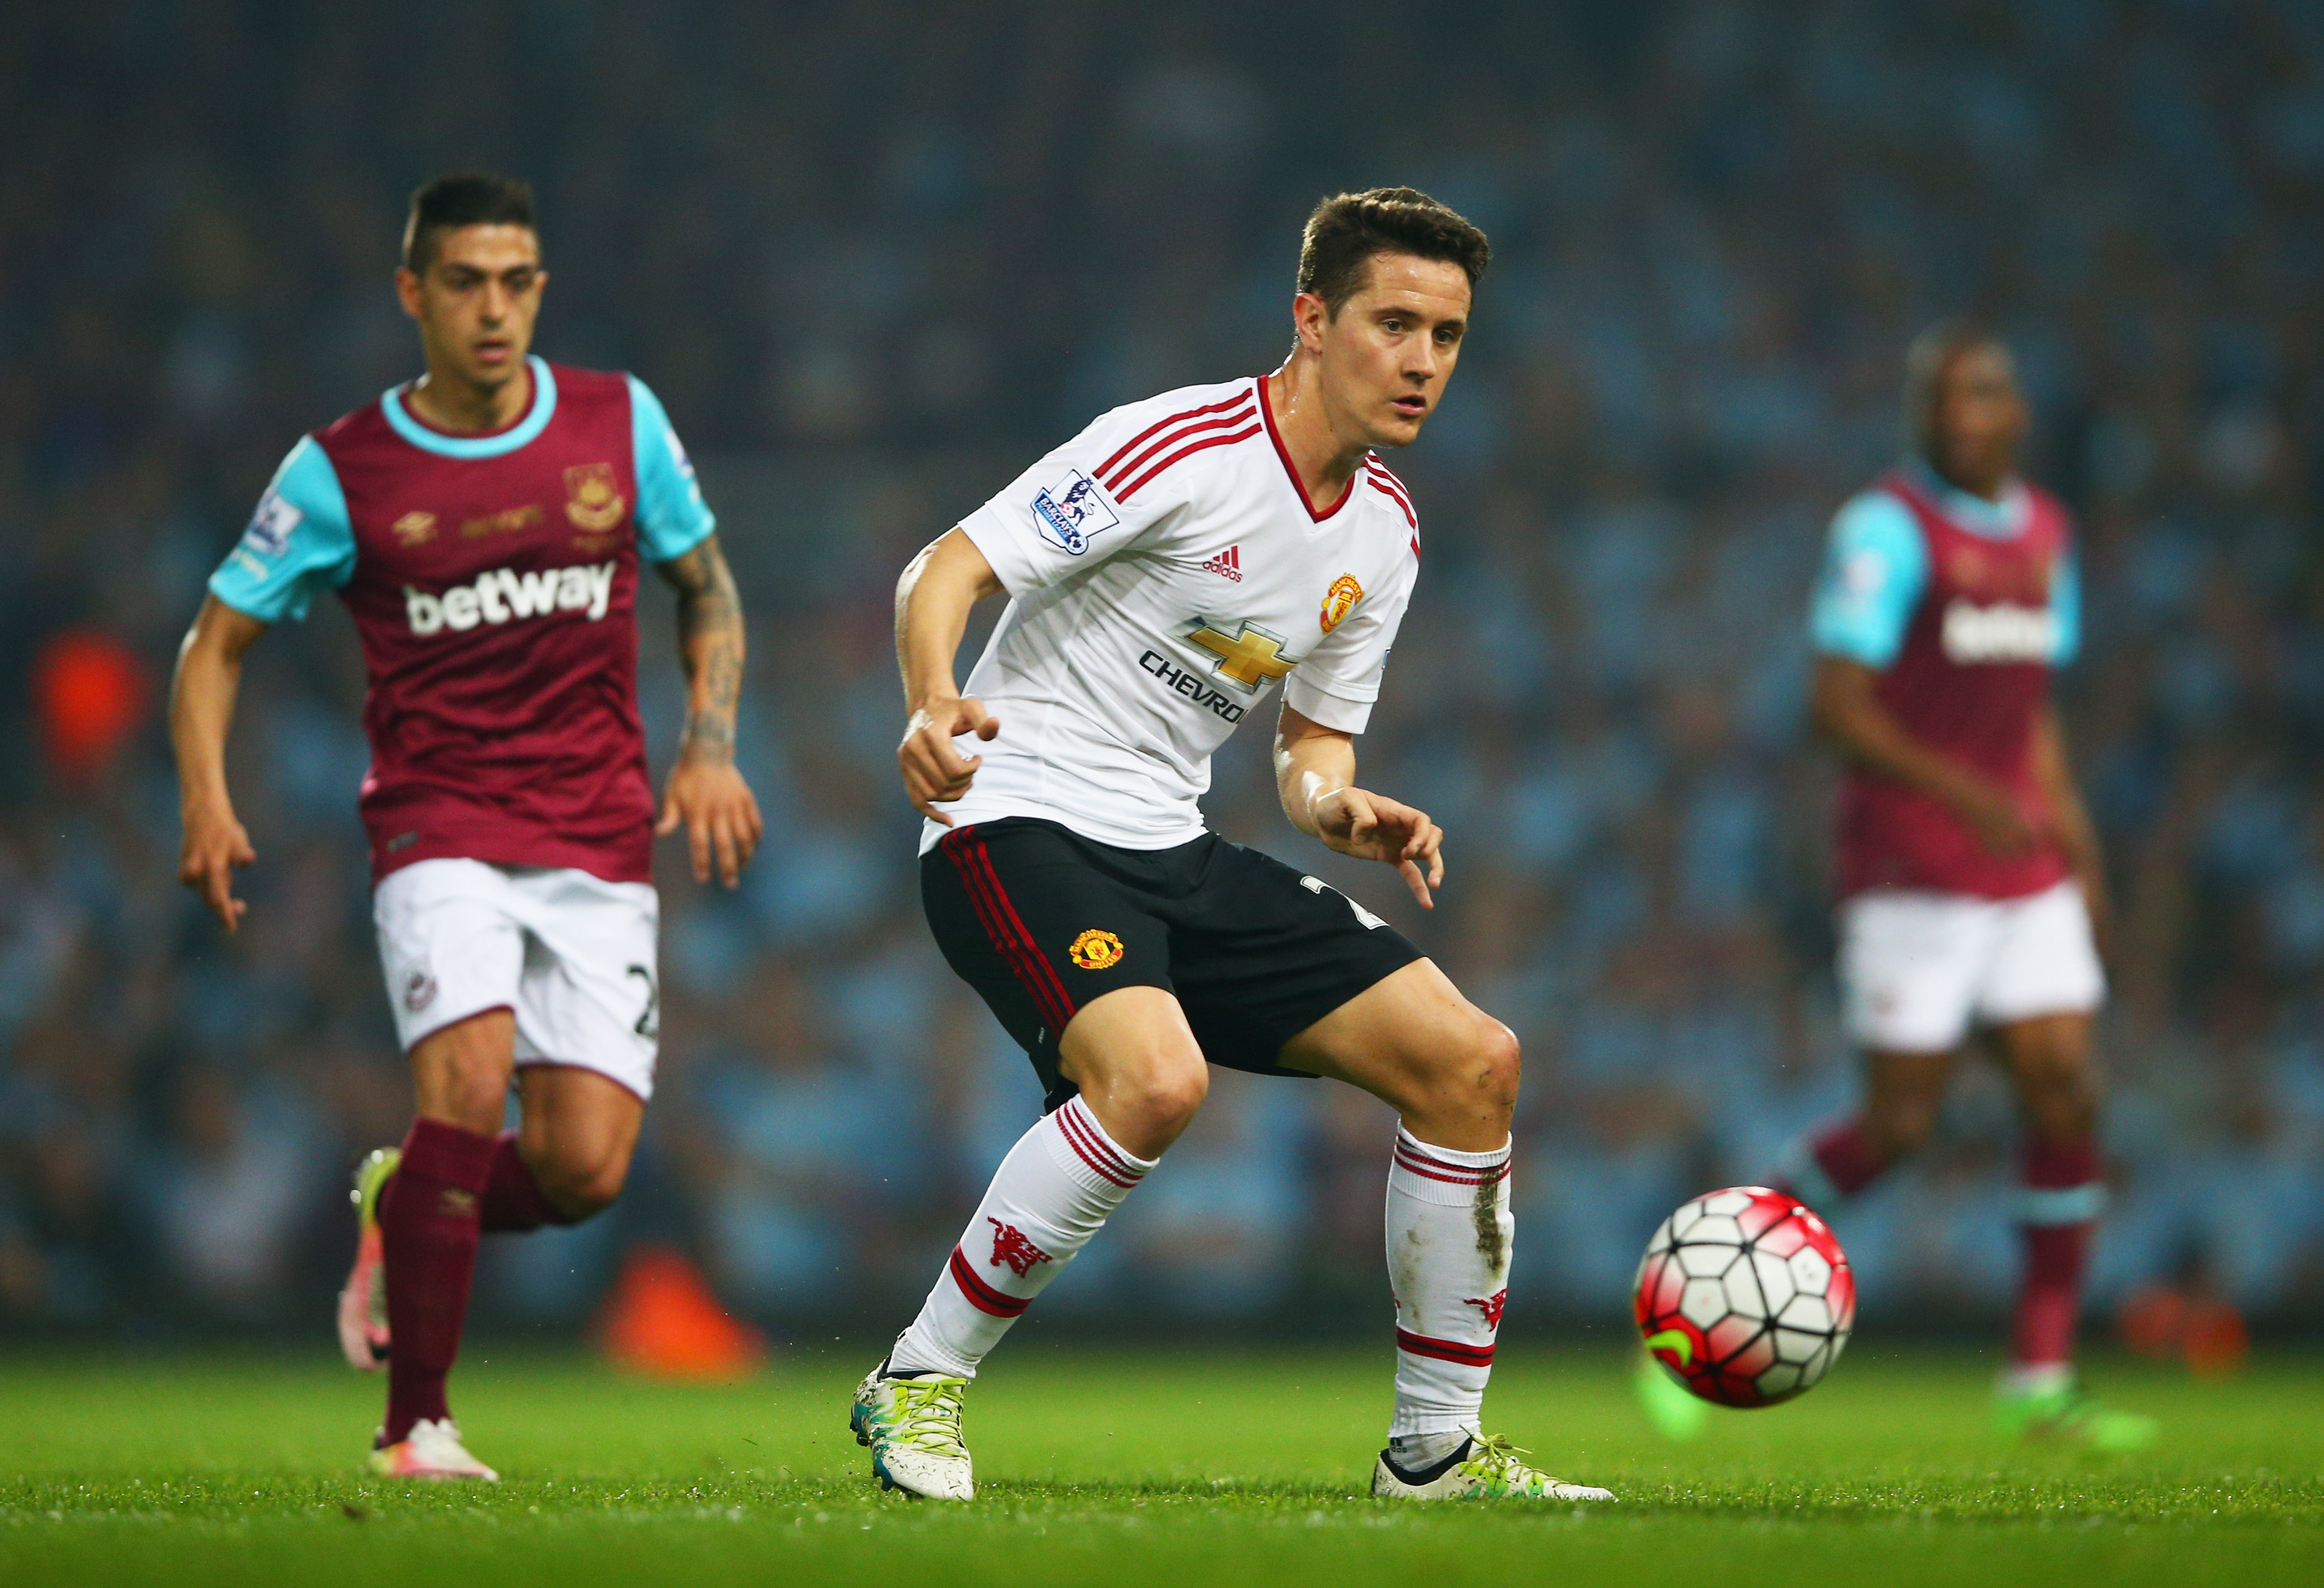 LONDON, UNITED KINGDOM - MAY 10:  Ander Herrera of Manchester United is watched by Manuel Lanzini of West Ham United during the Barclays Premier League match between West Ham United and Manchester United at the Boleyn Ground on May 10, 2016 in London, England. West Ham United are playing their last ever home match at the Boleyn Ground after their 112 year stay at the stadium. The Hammers will move to the Olympic Stadium for the 2016-17 season.  (Photo by Paul Gilham/Getty Images)